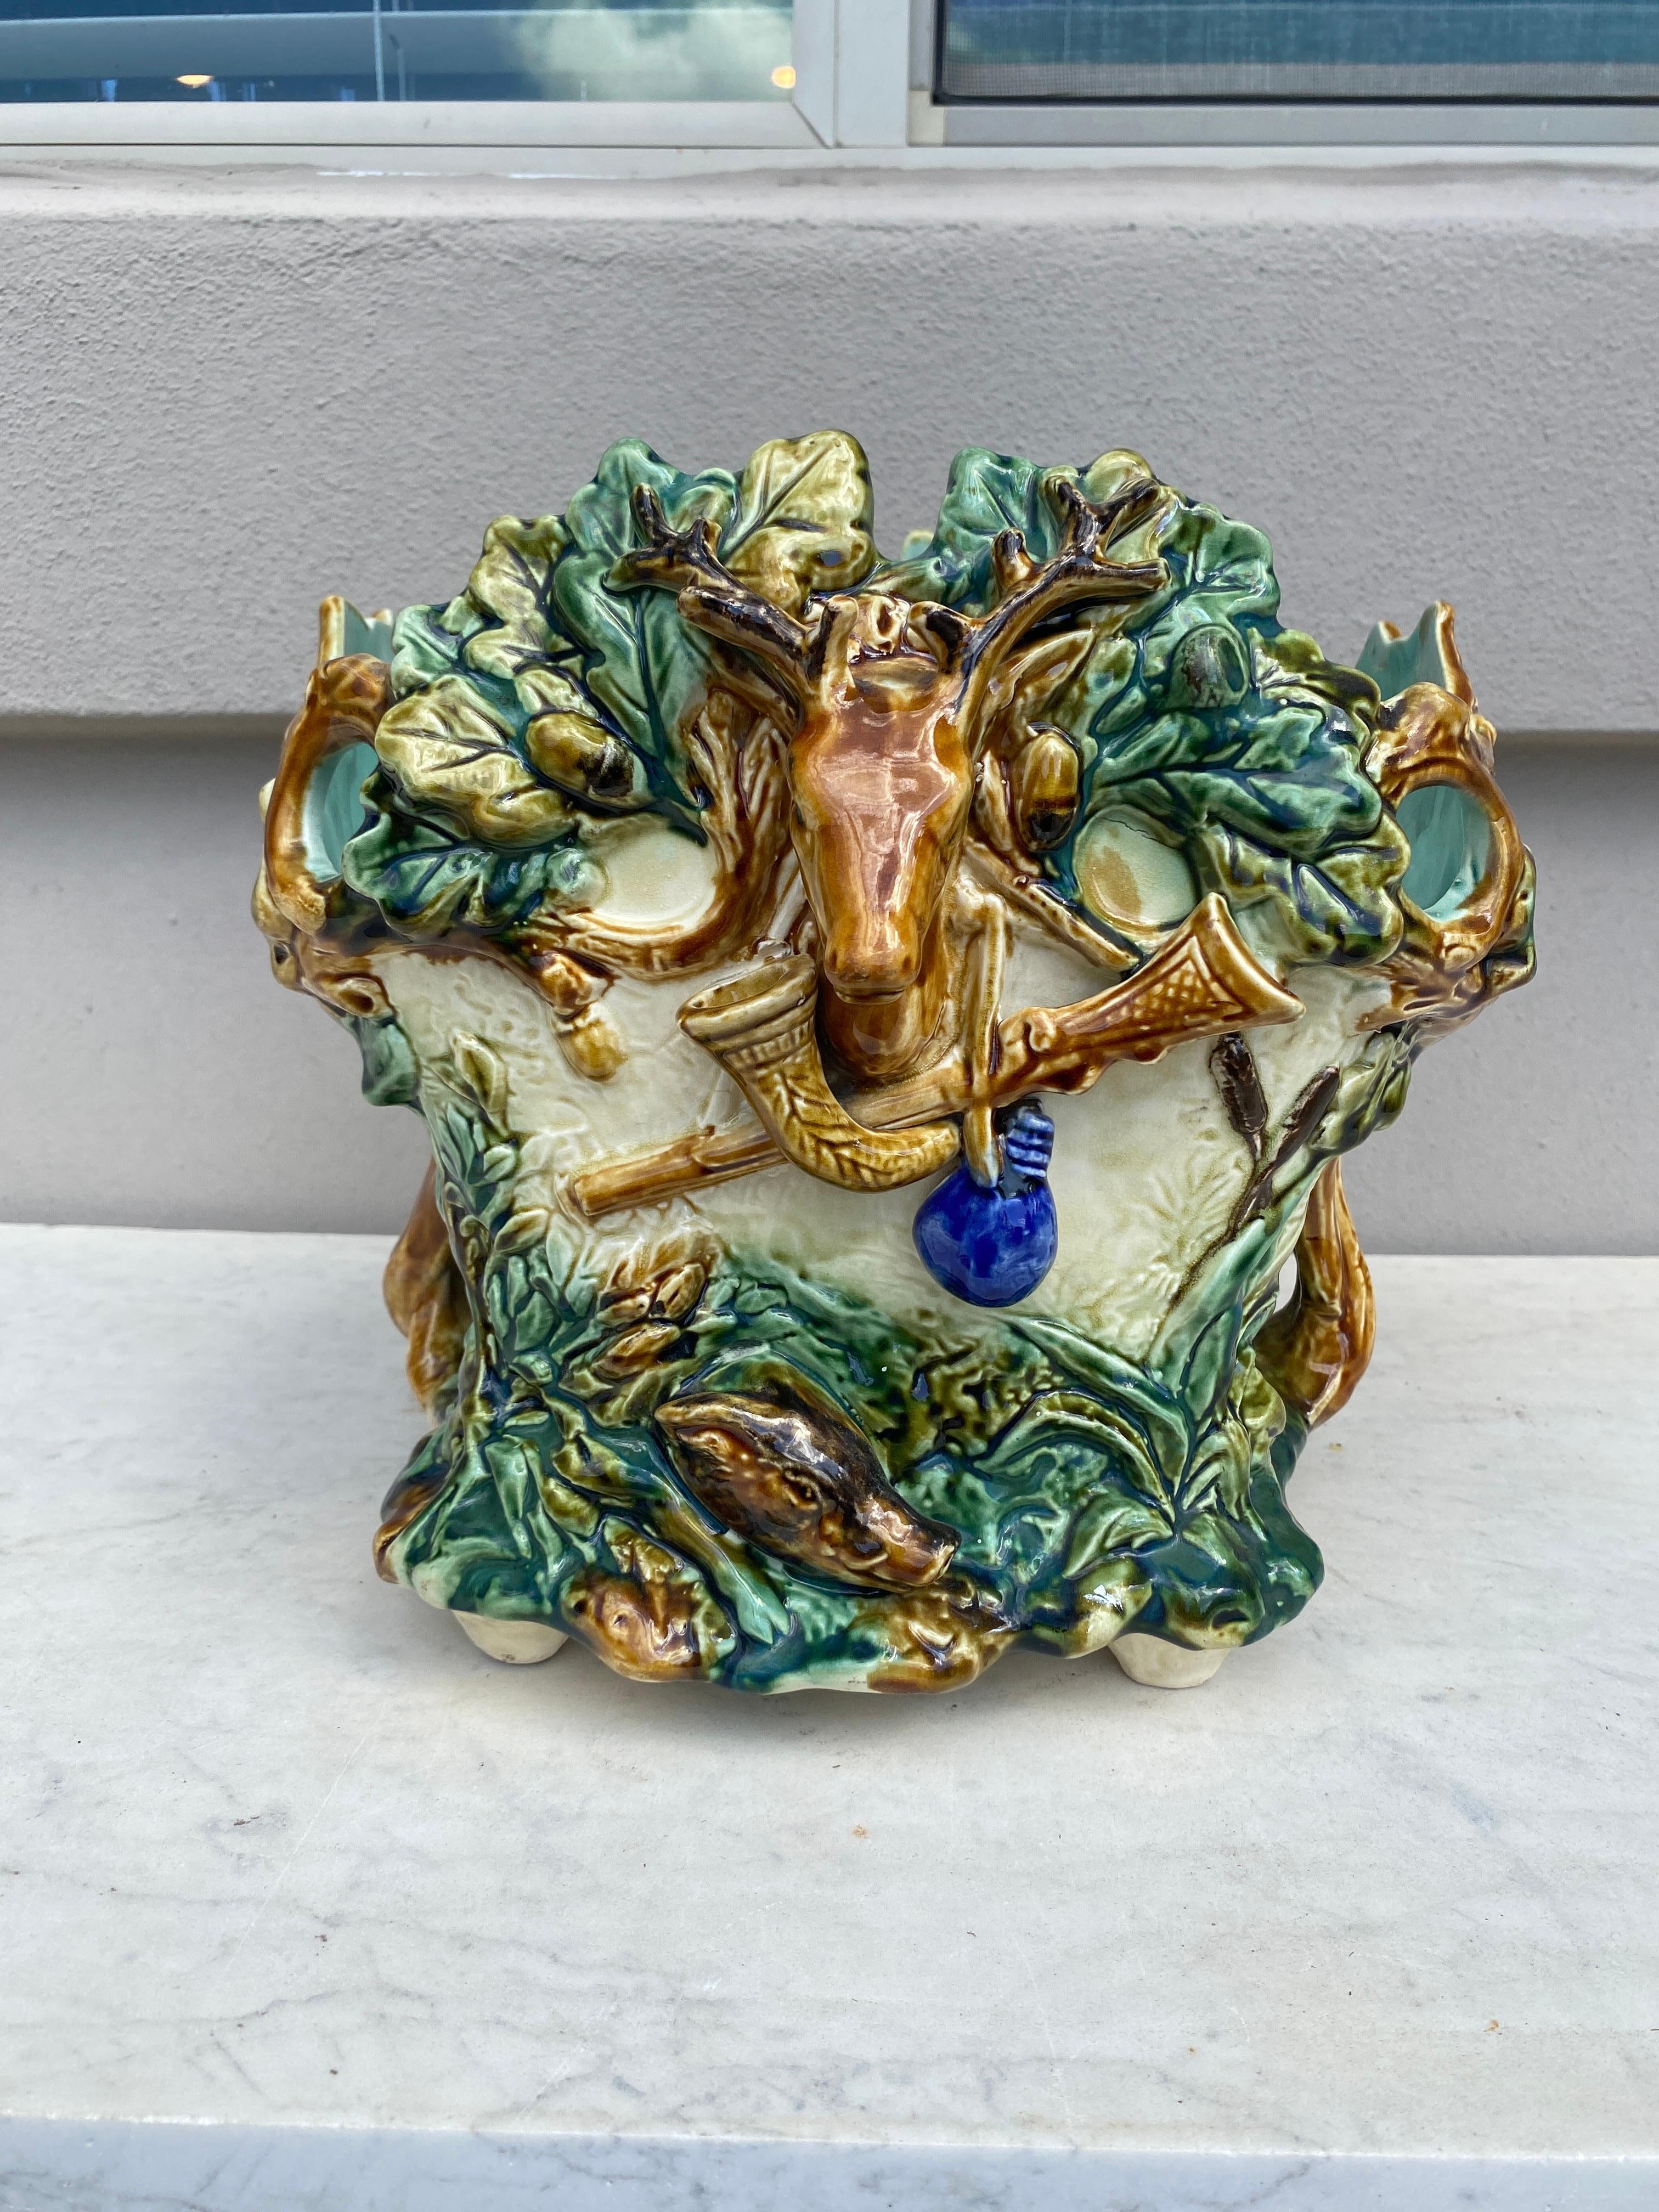 19th Century square Majolica hunt jardinière signed Onnaing.
The planter is decorated with a deer head on the front, oak leaves and acorns, hunting symbols ( gamebag, horn and carbine) on the front also a boar head and a goose.
Measures: 9 3/4 x 11